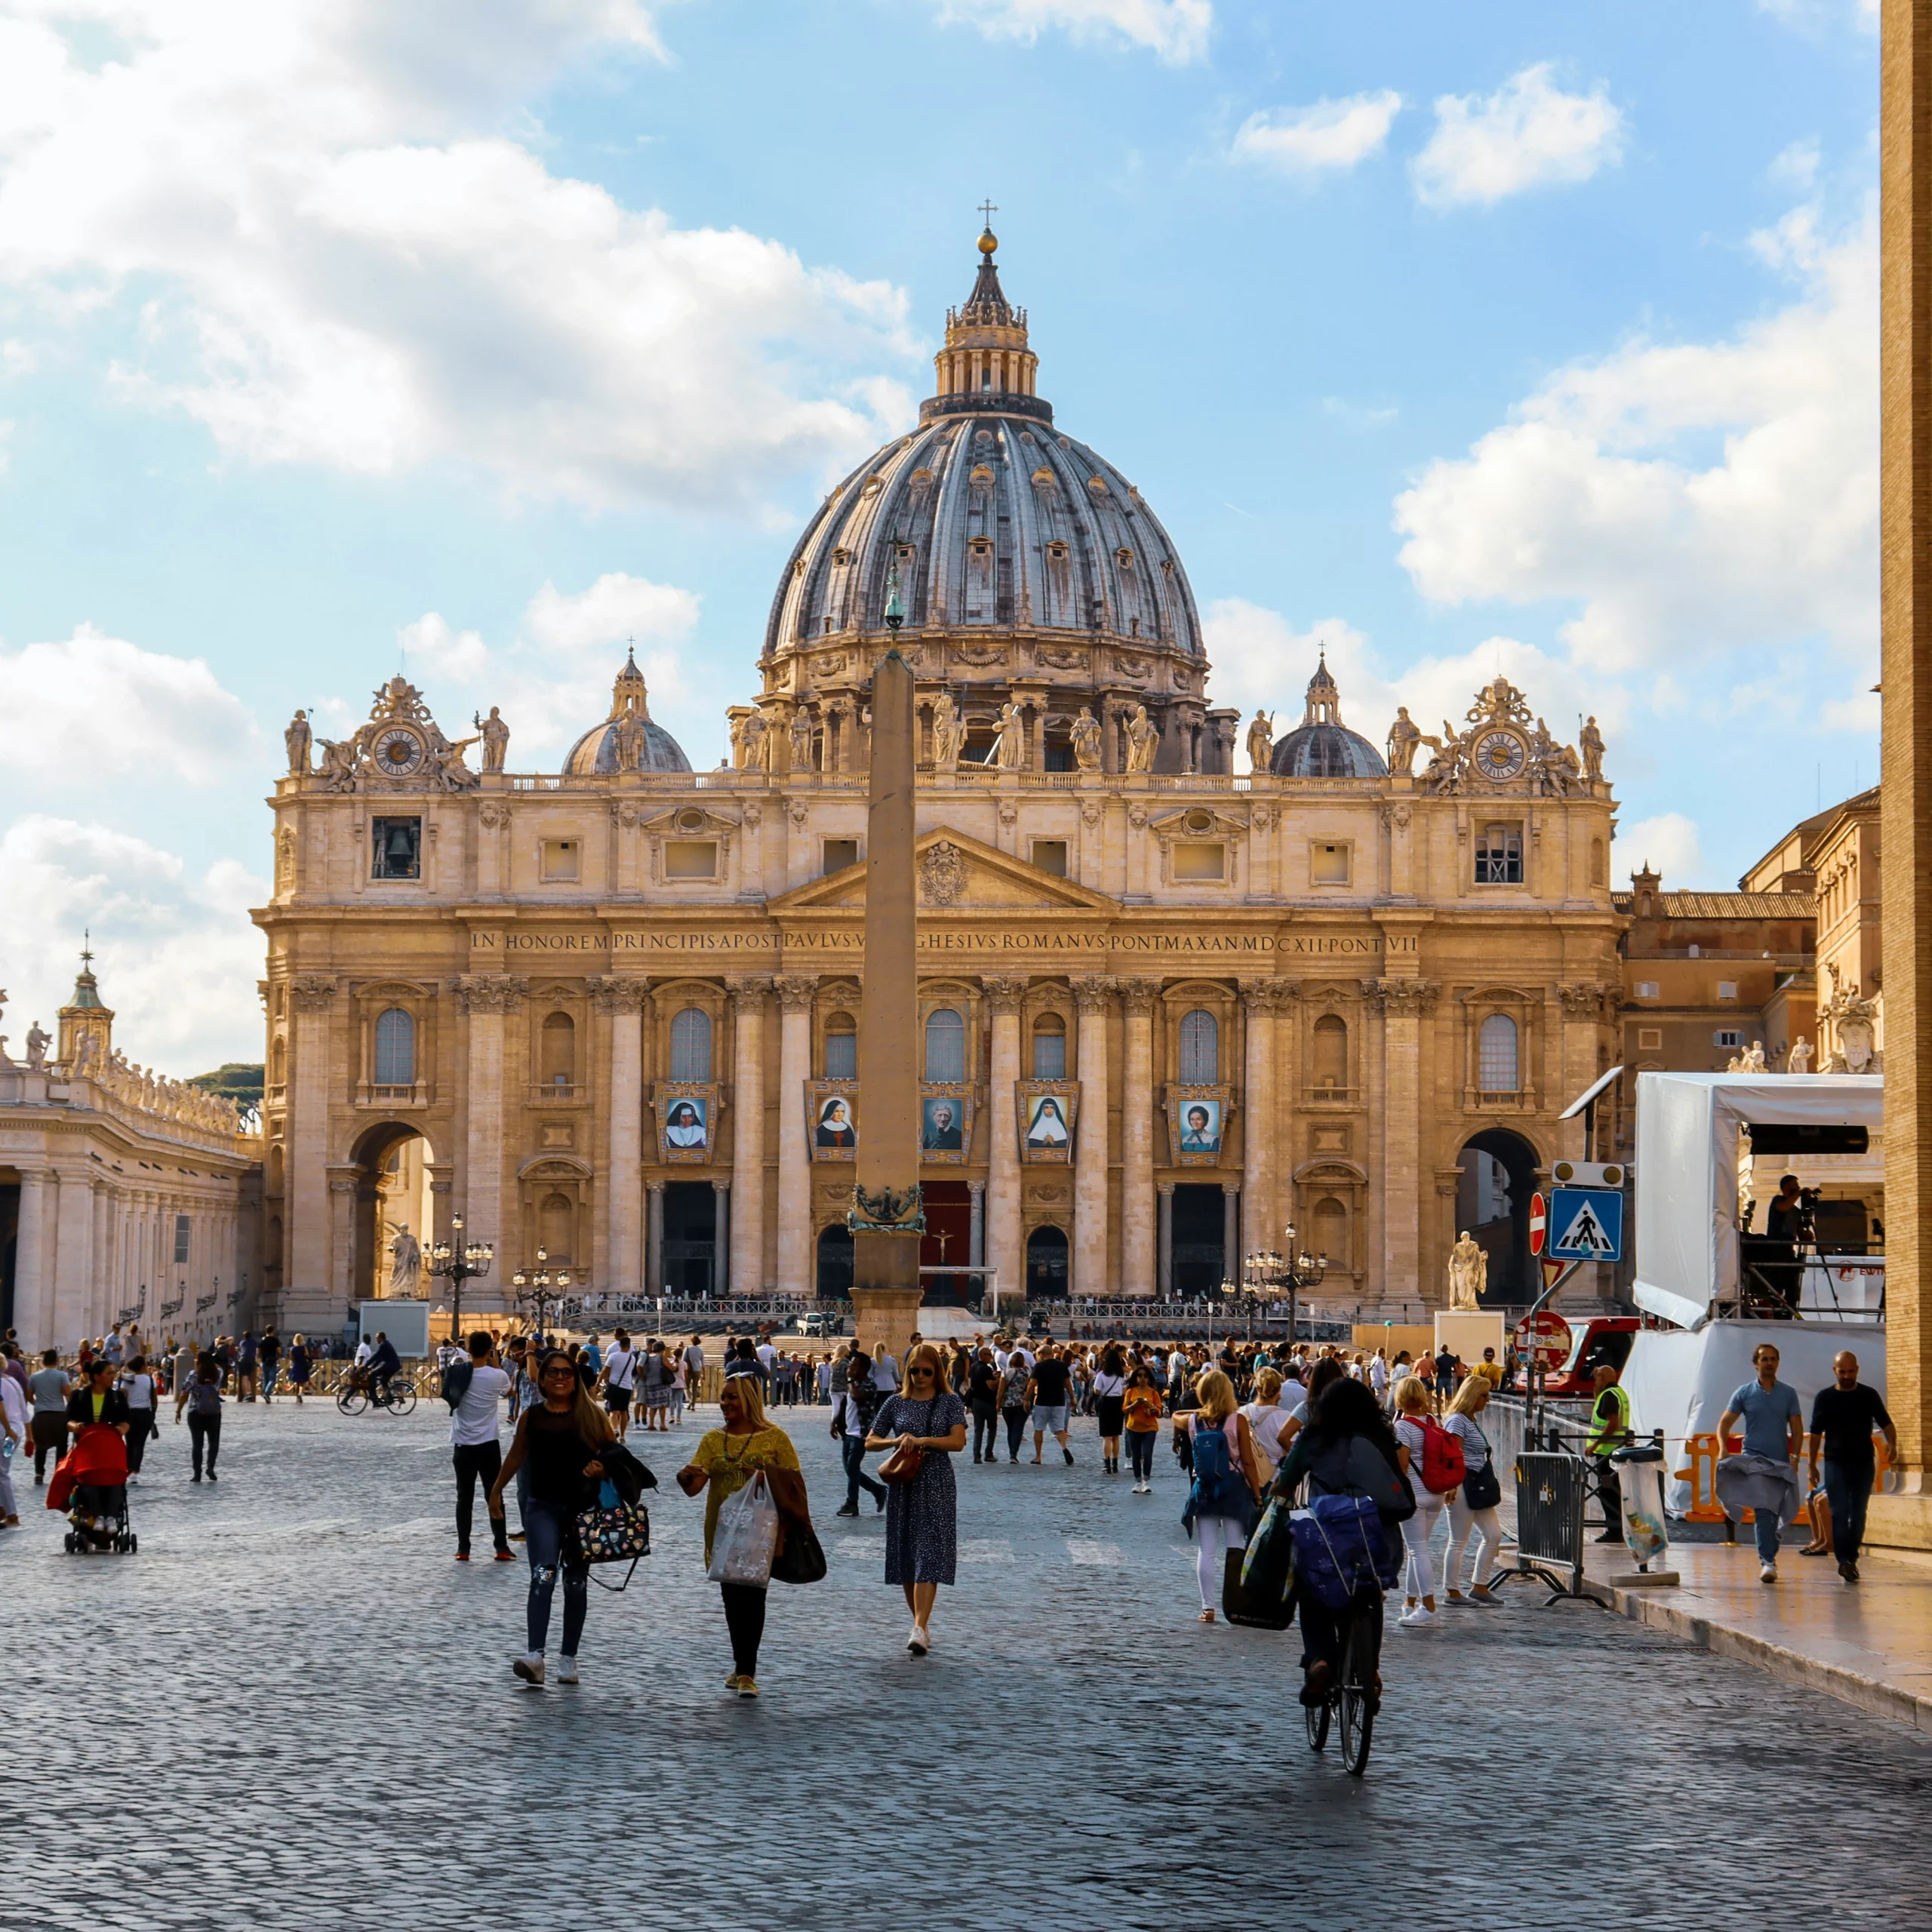 What are the advantages of purchasing skip-the-line tickets for the Vatican?